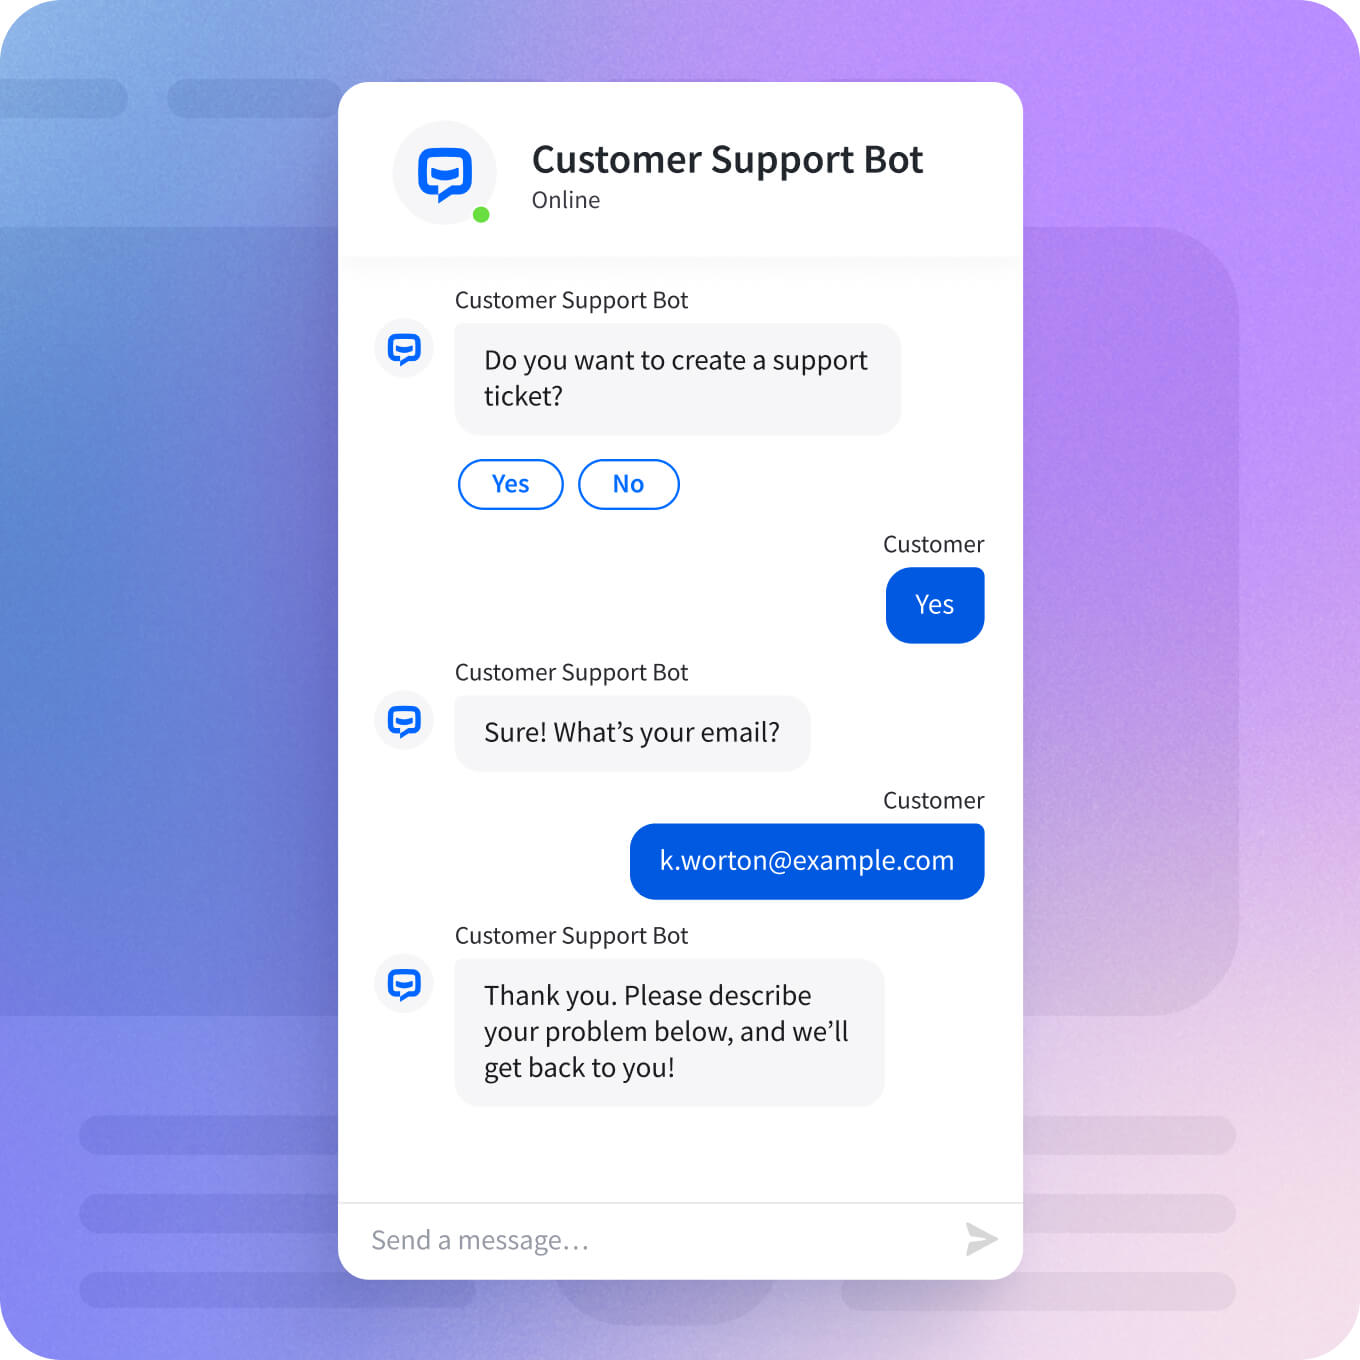 Customer interaction in a chat widget with 'Customer Support Bot' asking if they want to create a support ticket, requesting their email, and asking for a description of the problem after the customer agrees.